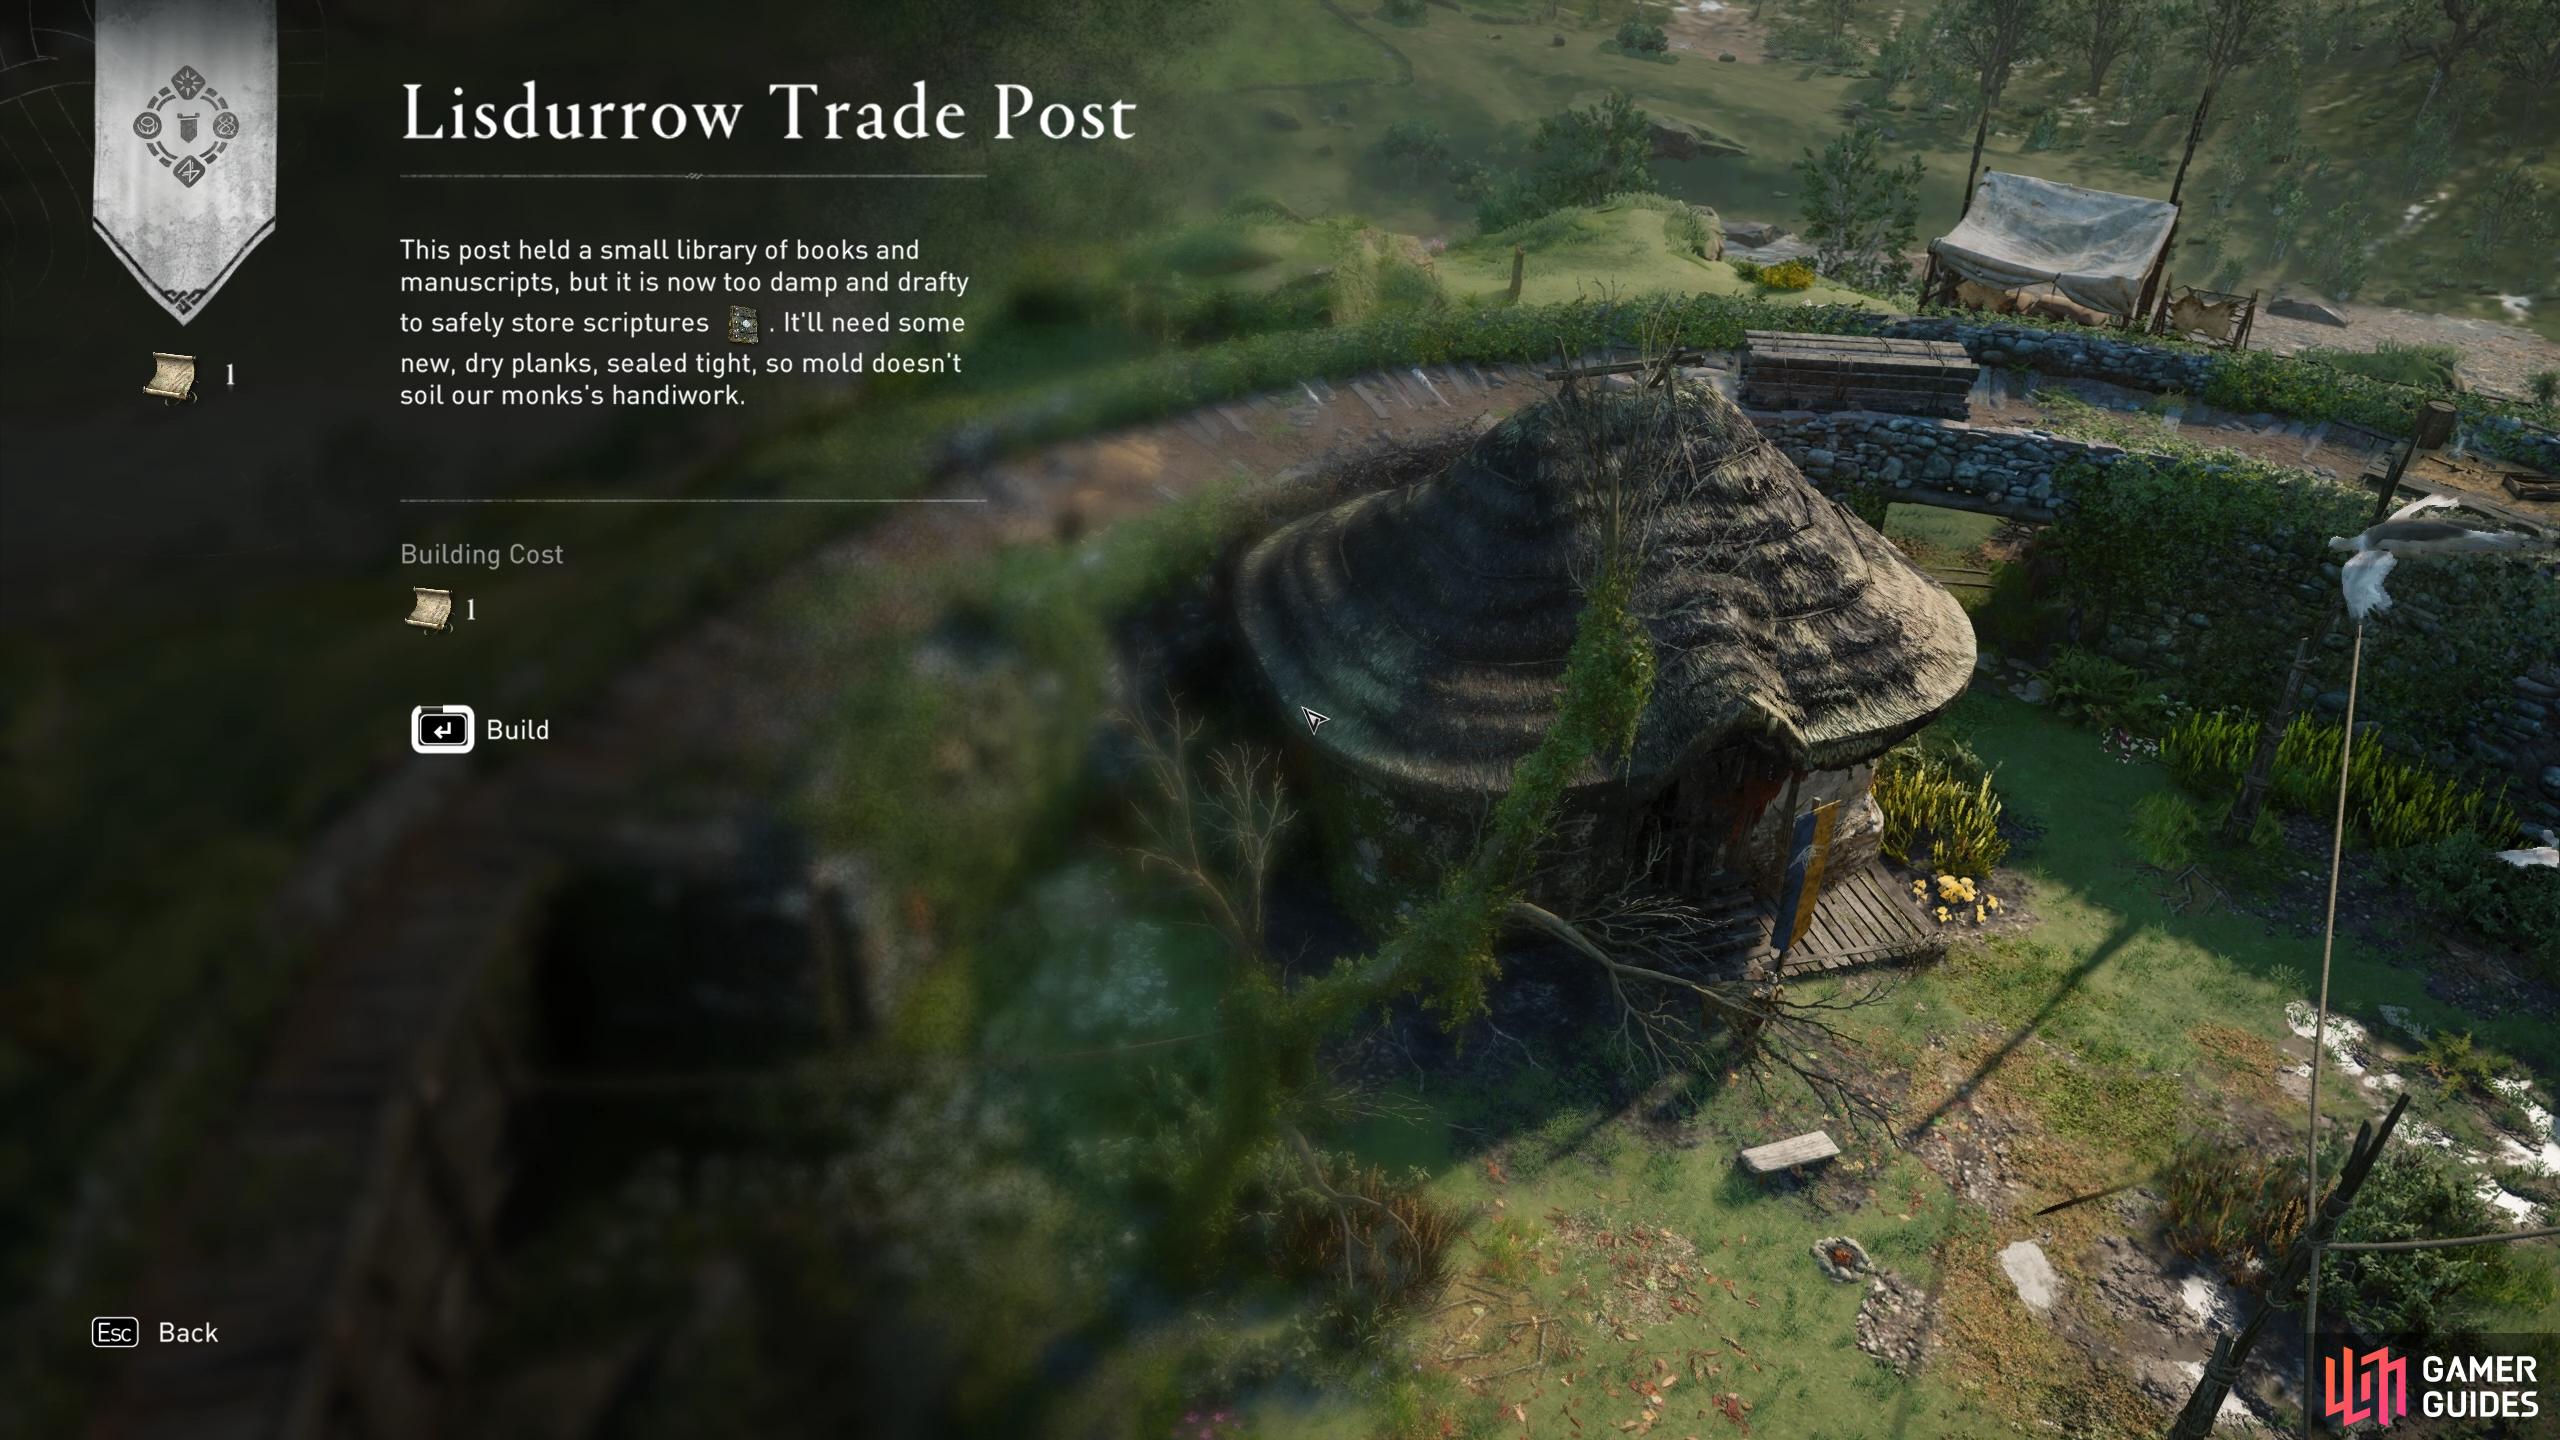 You can build the Lisdurrow trade post once you've obtained the deed.